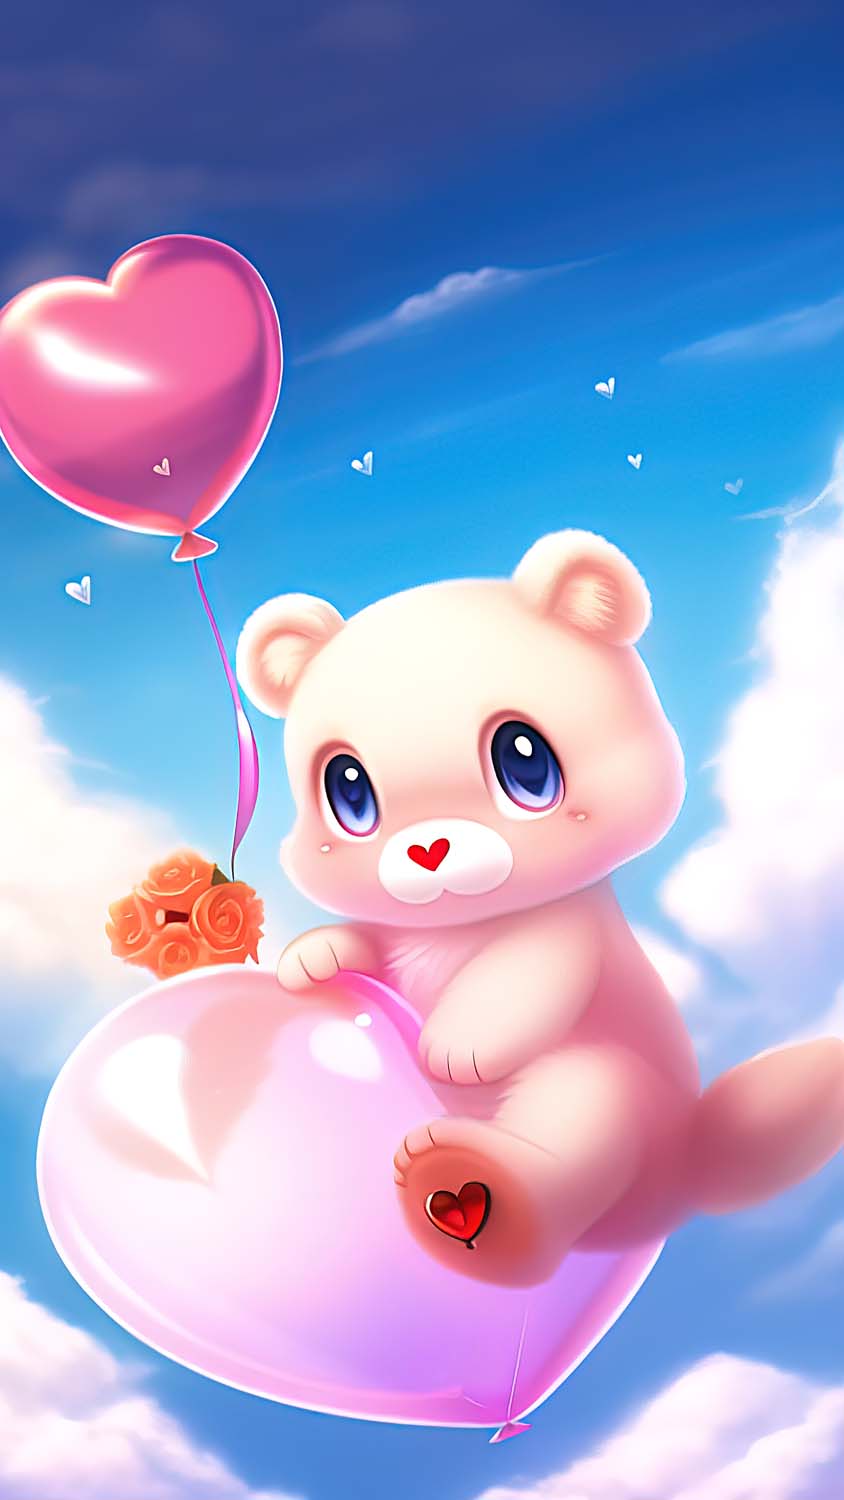 Love Teddy IPhone Wallpaper HD - IPhone Wallpapers : iPhone Wallpapers